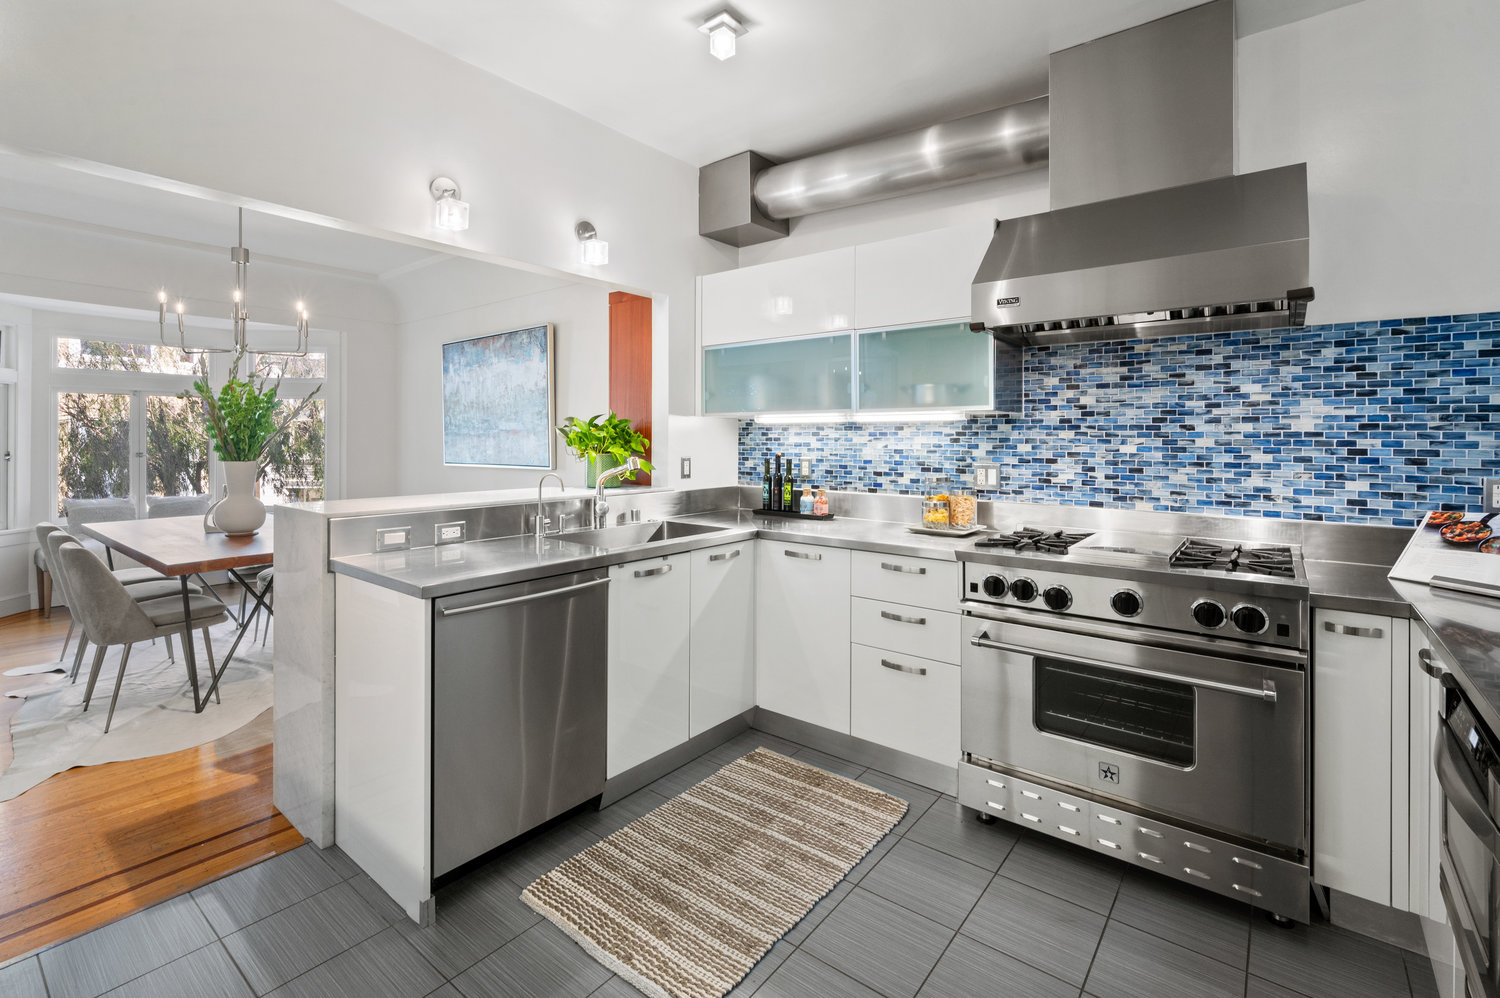 Property Photo: Kitchen has darker gray large tile floor with all white cabinetry. Counter tops are stainless steel. 